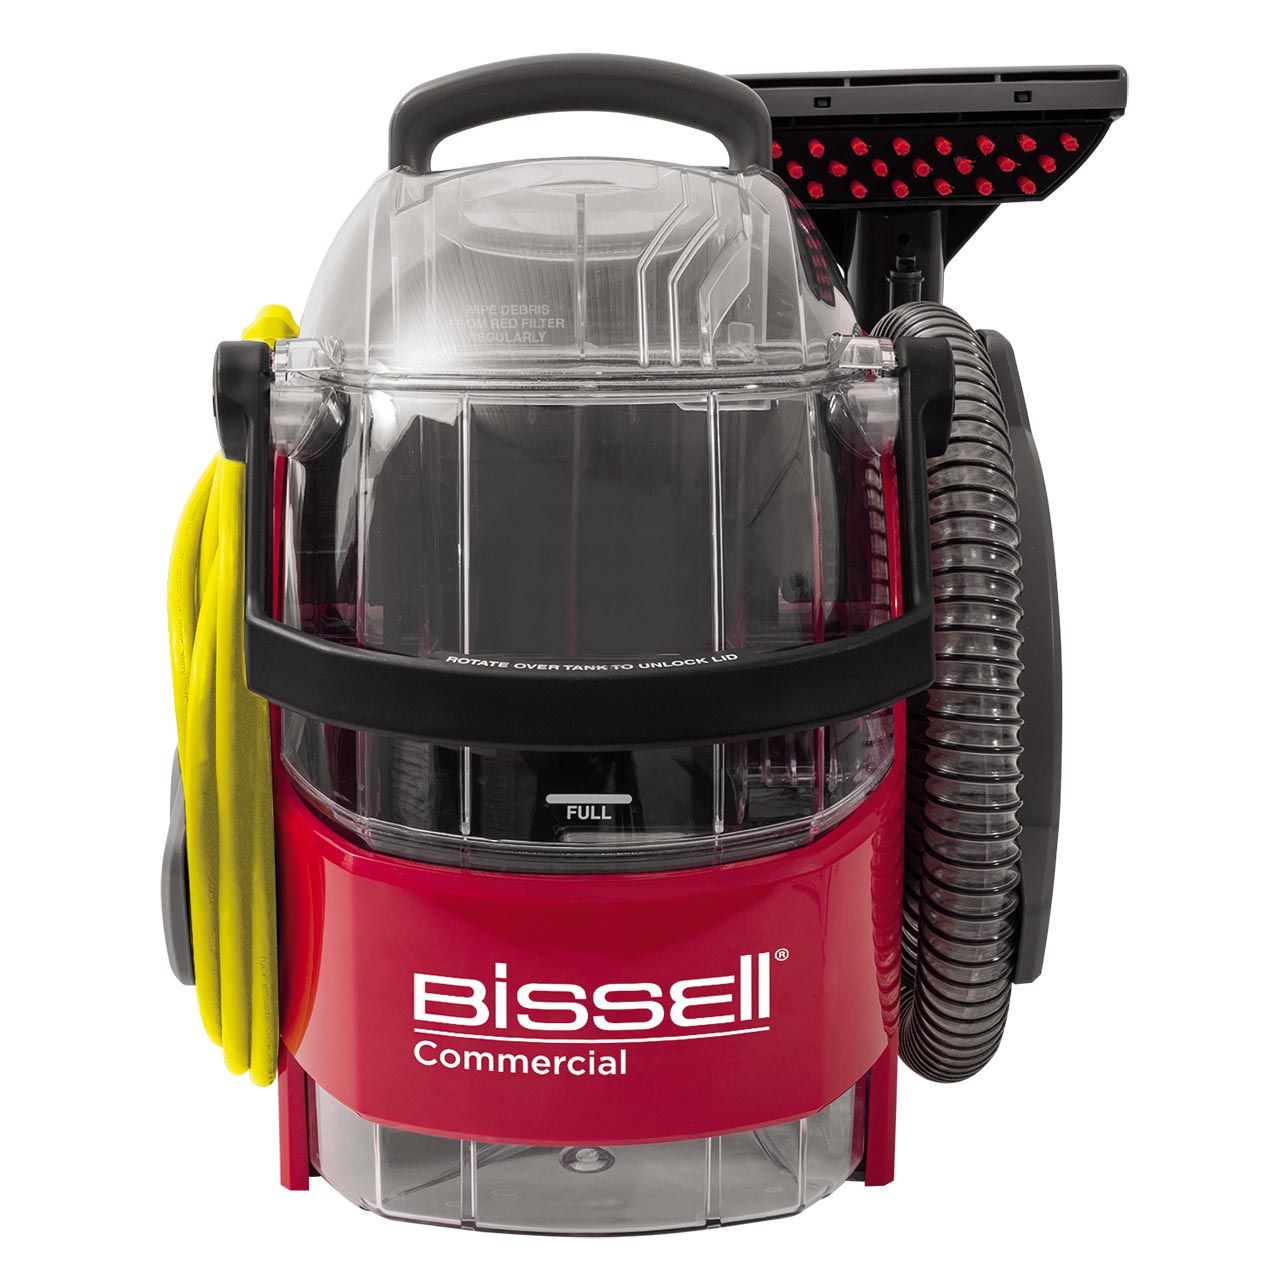 Bissell SC100 Commercial Portable Spot Extraction Cleaner